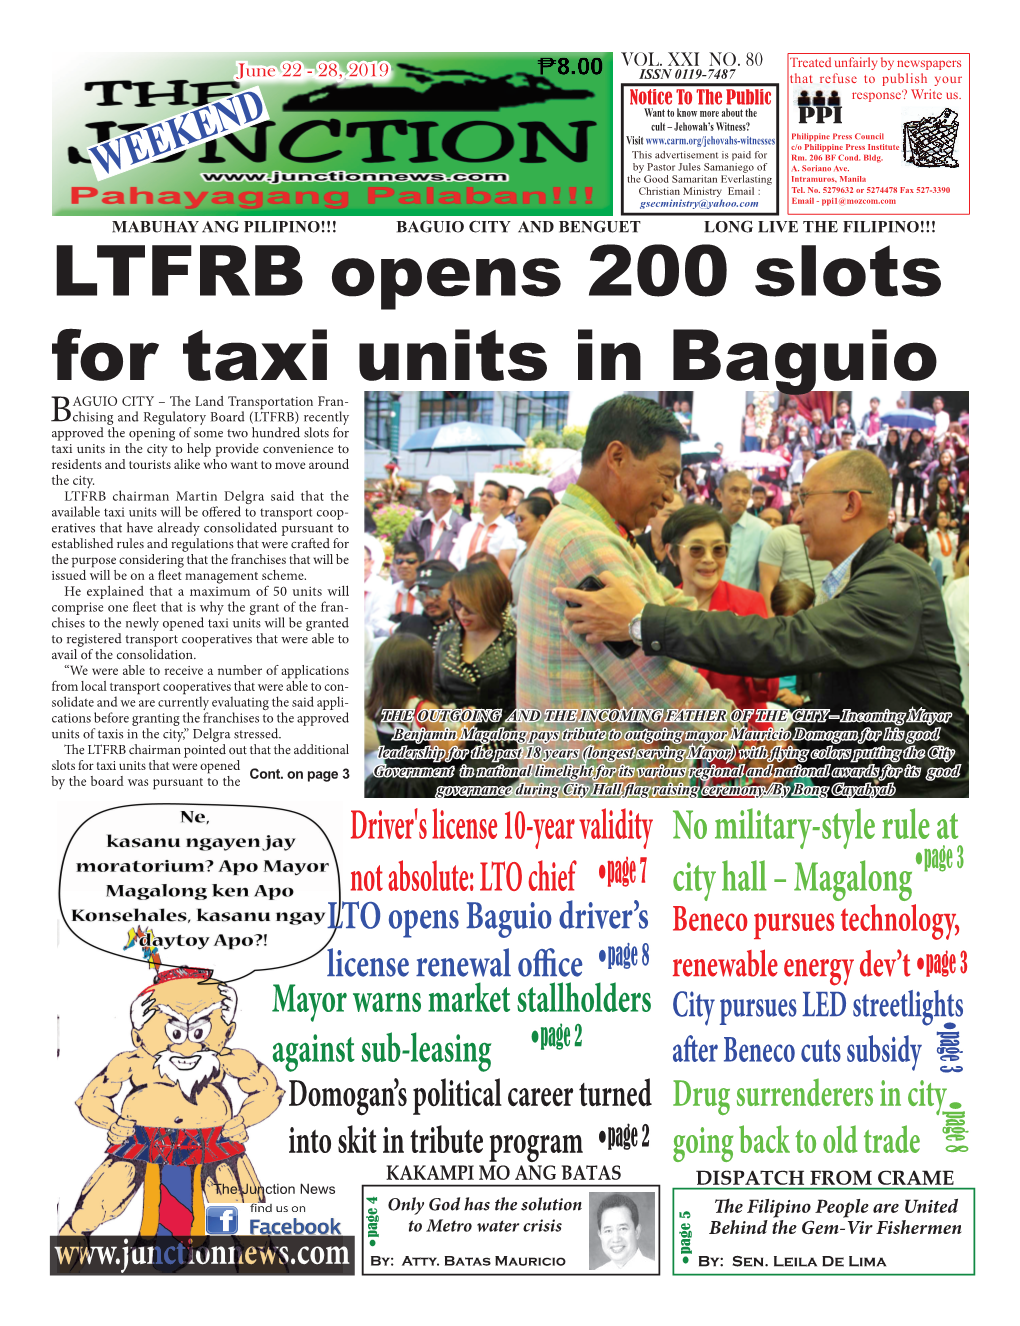 LTFRB Opens 200 Slots for Taxi Units in Baguio